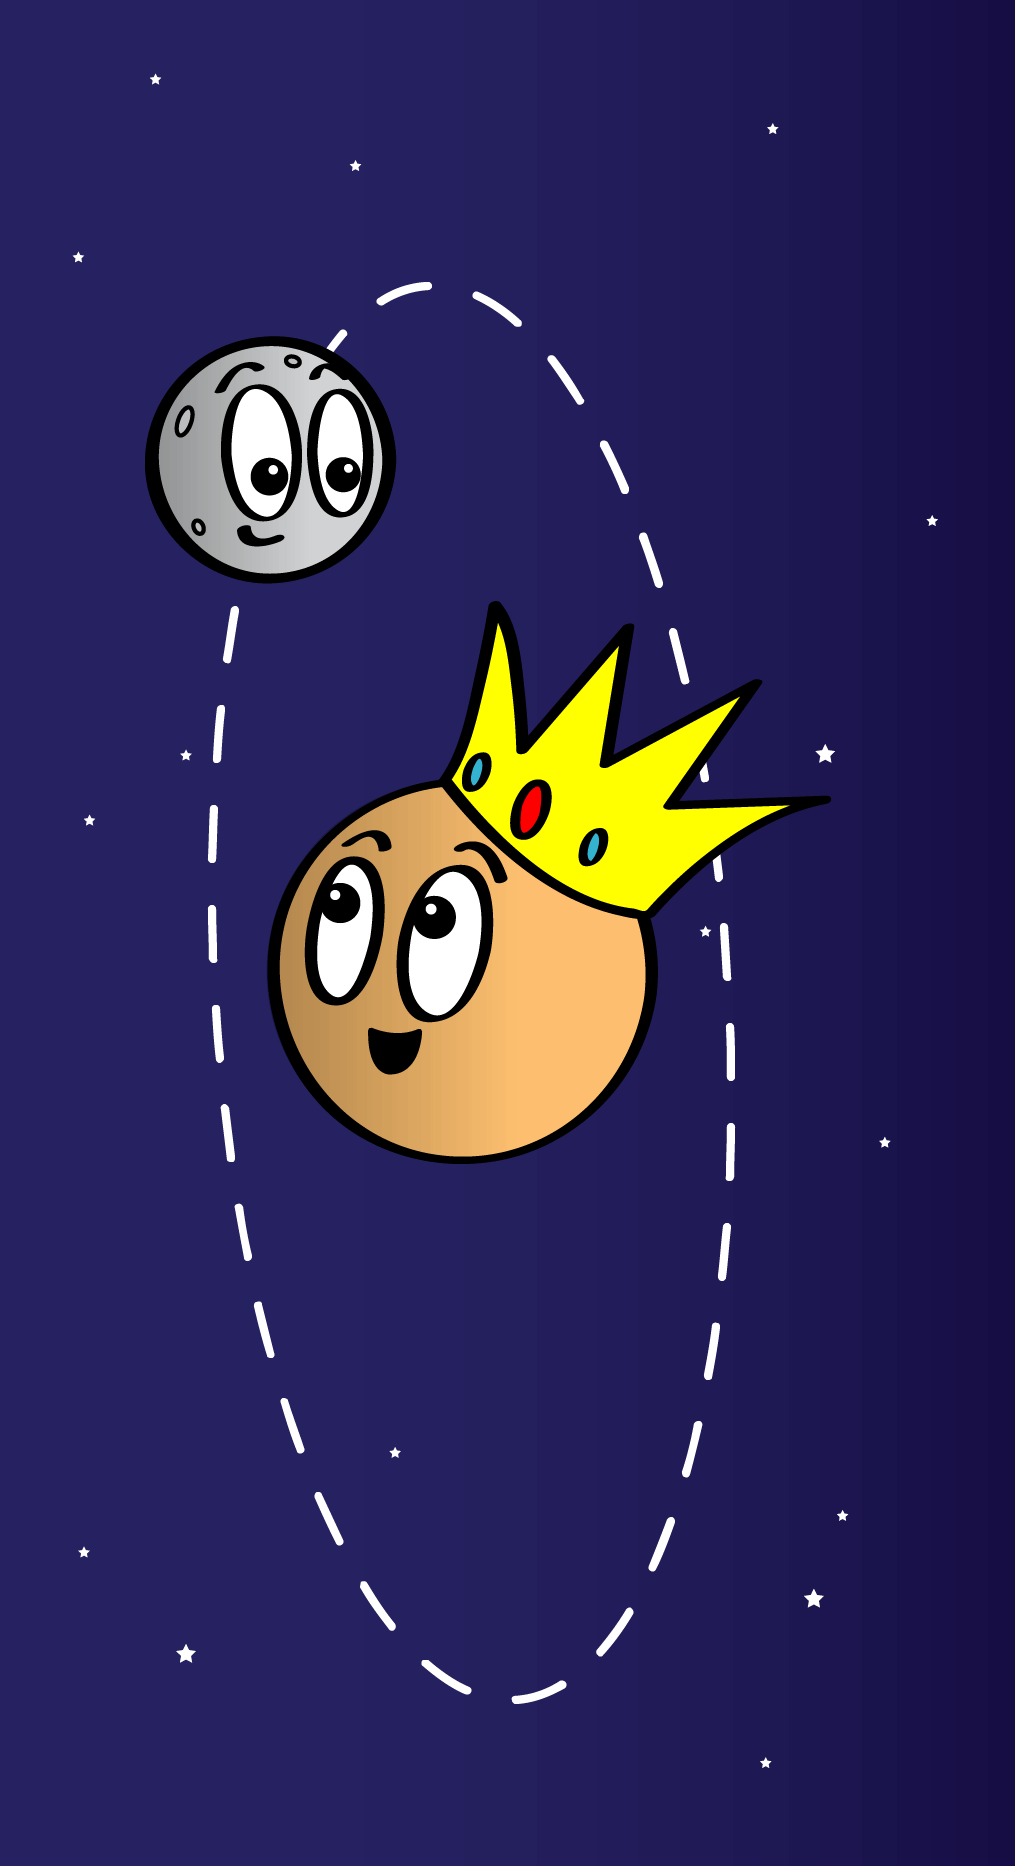 An orange Pluto smiles at a small gray Charon. Charon sits on an oval dotted line which represents its orbit around Pluto and smiles back. Pluto wears a yellow crown with three stones – one red and two green.